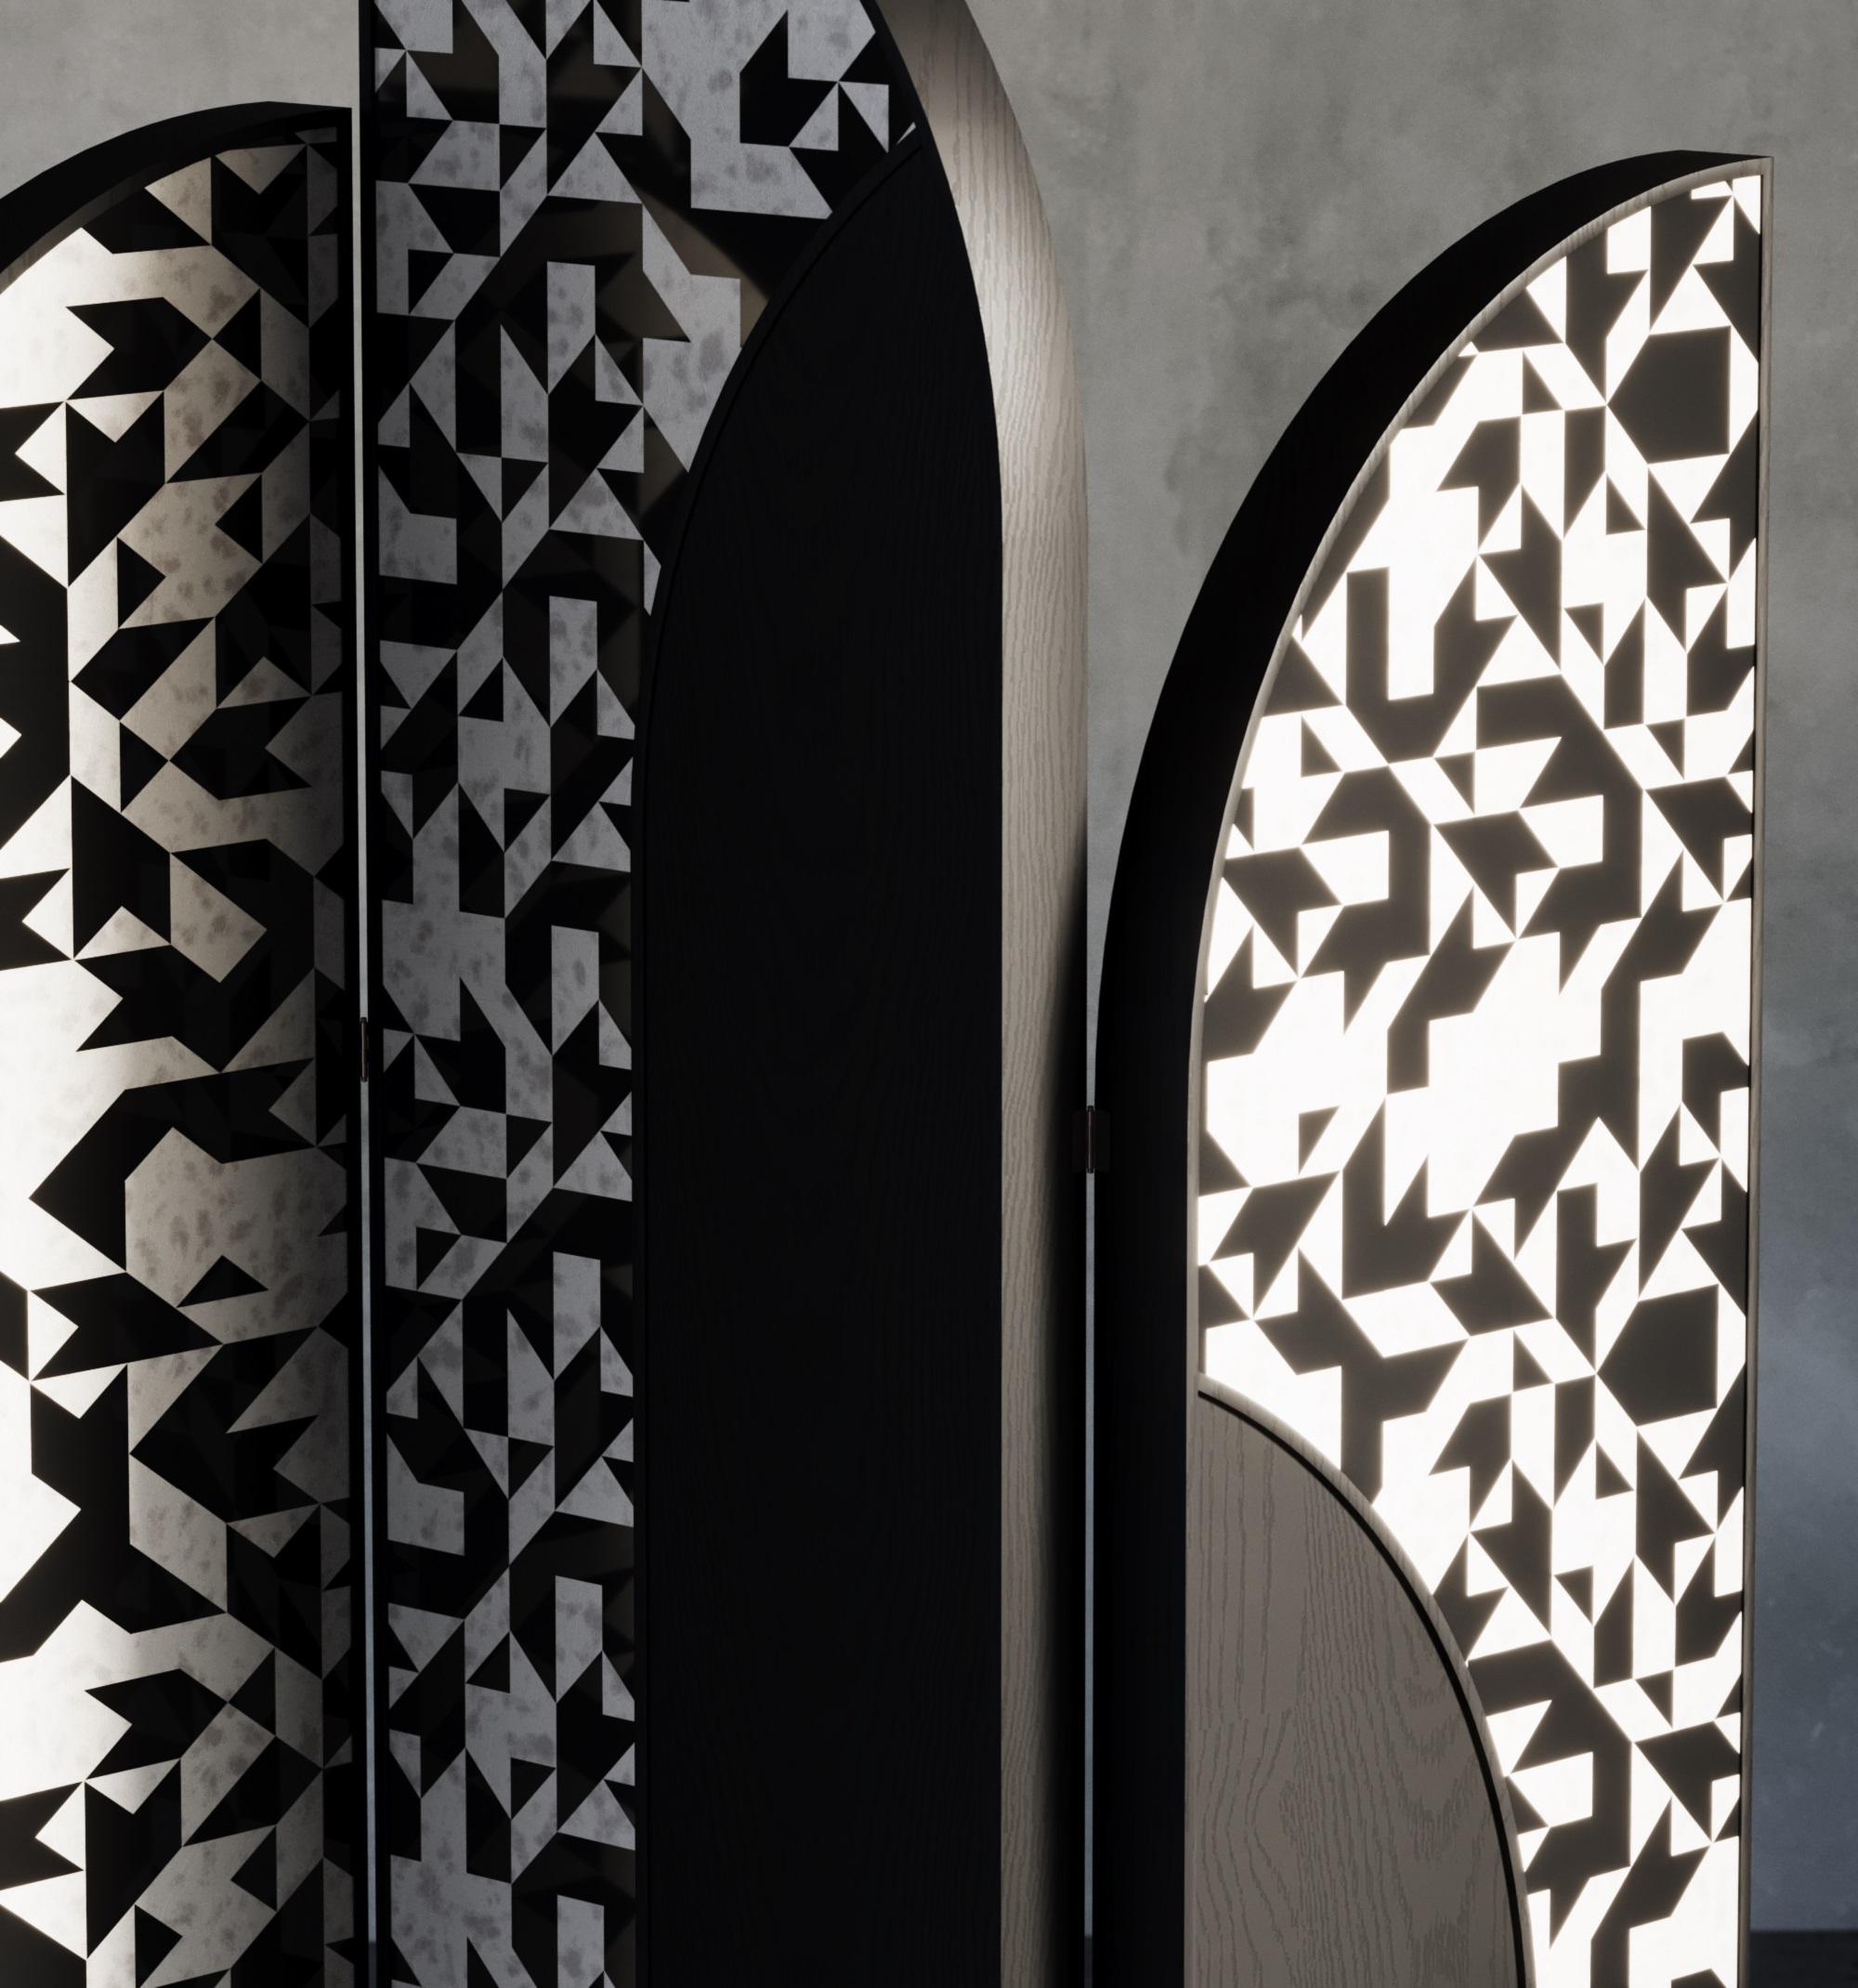 Featuring intricately patterned inlaid bone and resin Screen. The Noir collection creates a striking vision of geometric beauty. Our Bone Inlay collection is crafted in India by highly skilled craftsmen using traditional techniques that have been